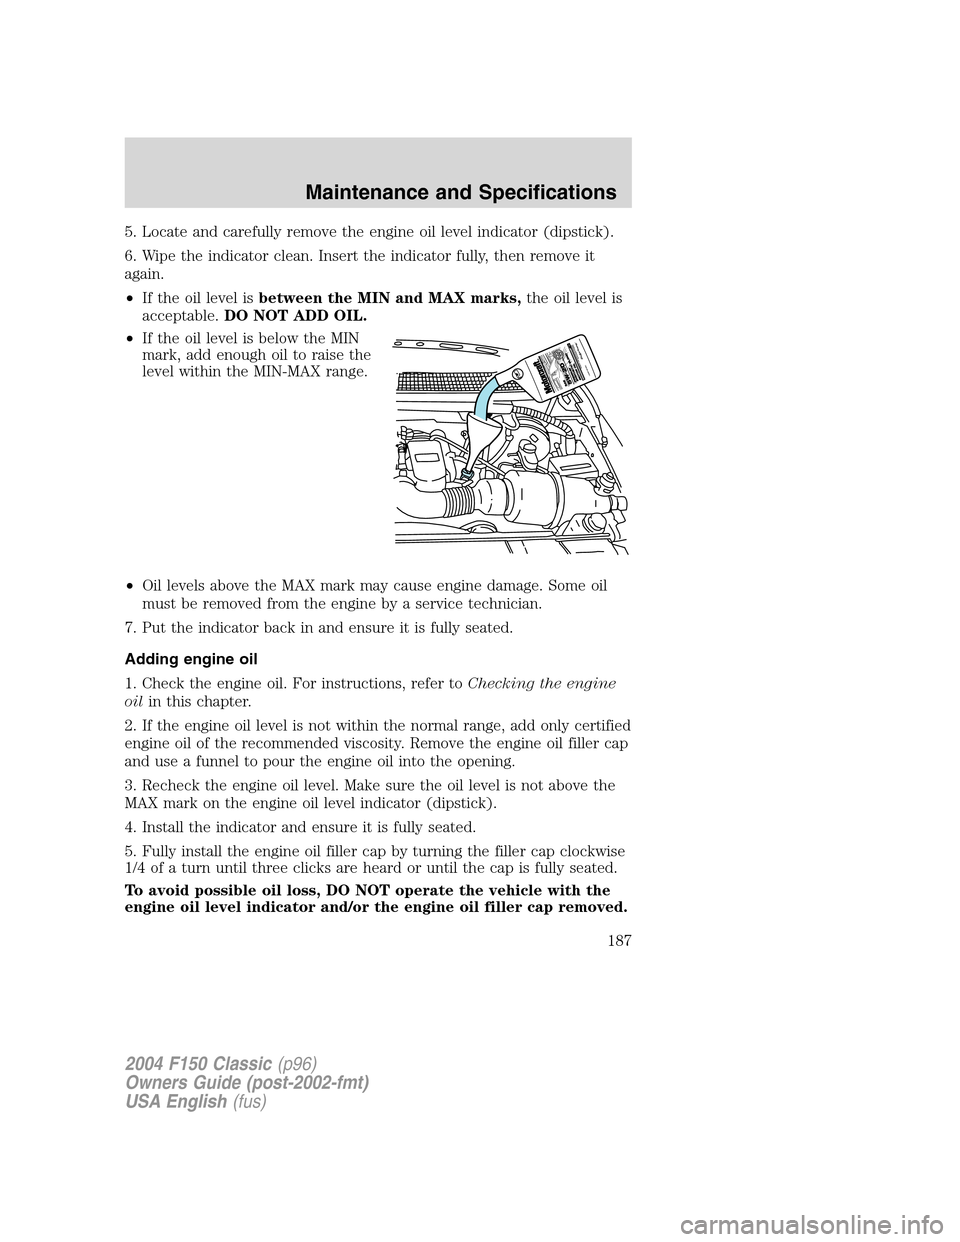 FORD F150 2004 11.G Herritage Owners Manual 5. Locate and carefully remove the engine oil level indicator (dipstick).
6. Wipe the indicator clean. Insert the indicator fully, then remove it
again.
•If the oil level isbetween the MIN and MAX m